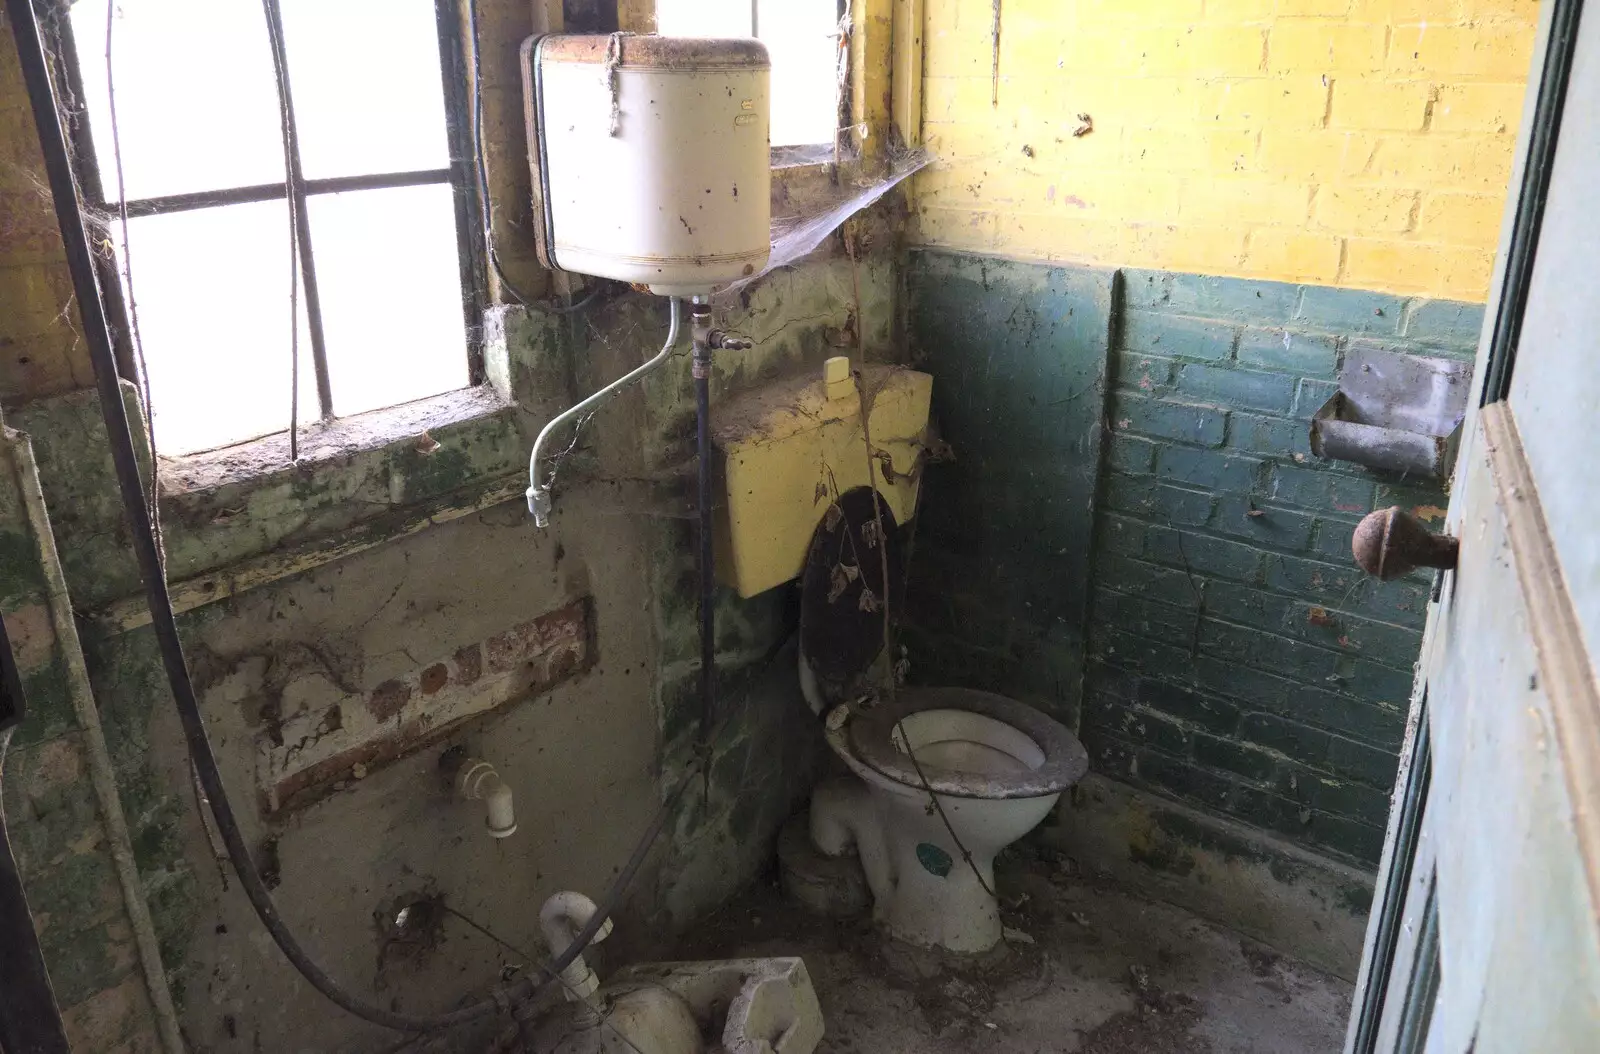 A 70s cistern on an original toilet, from A 1940s Timewarp, Site 4, Bungay Airfield, Flixton, Suffolk - 9th June 2022